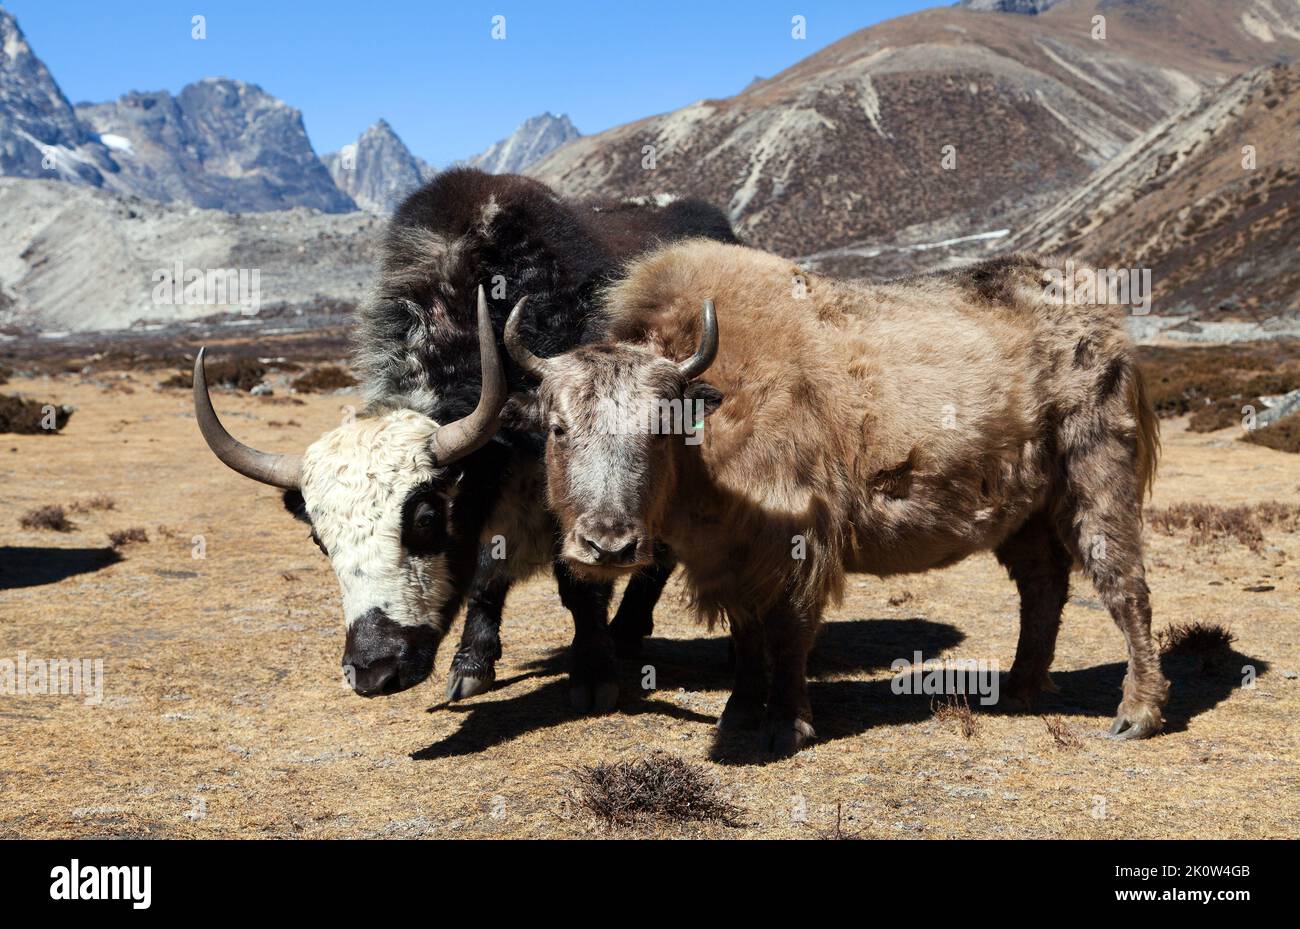 group of two yaks, bos grunniens or bos mutus, on the way to Everest base camp, Nepal Himalayas mountains Stock Photo